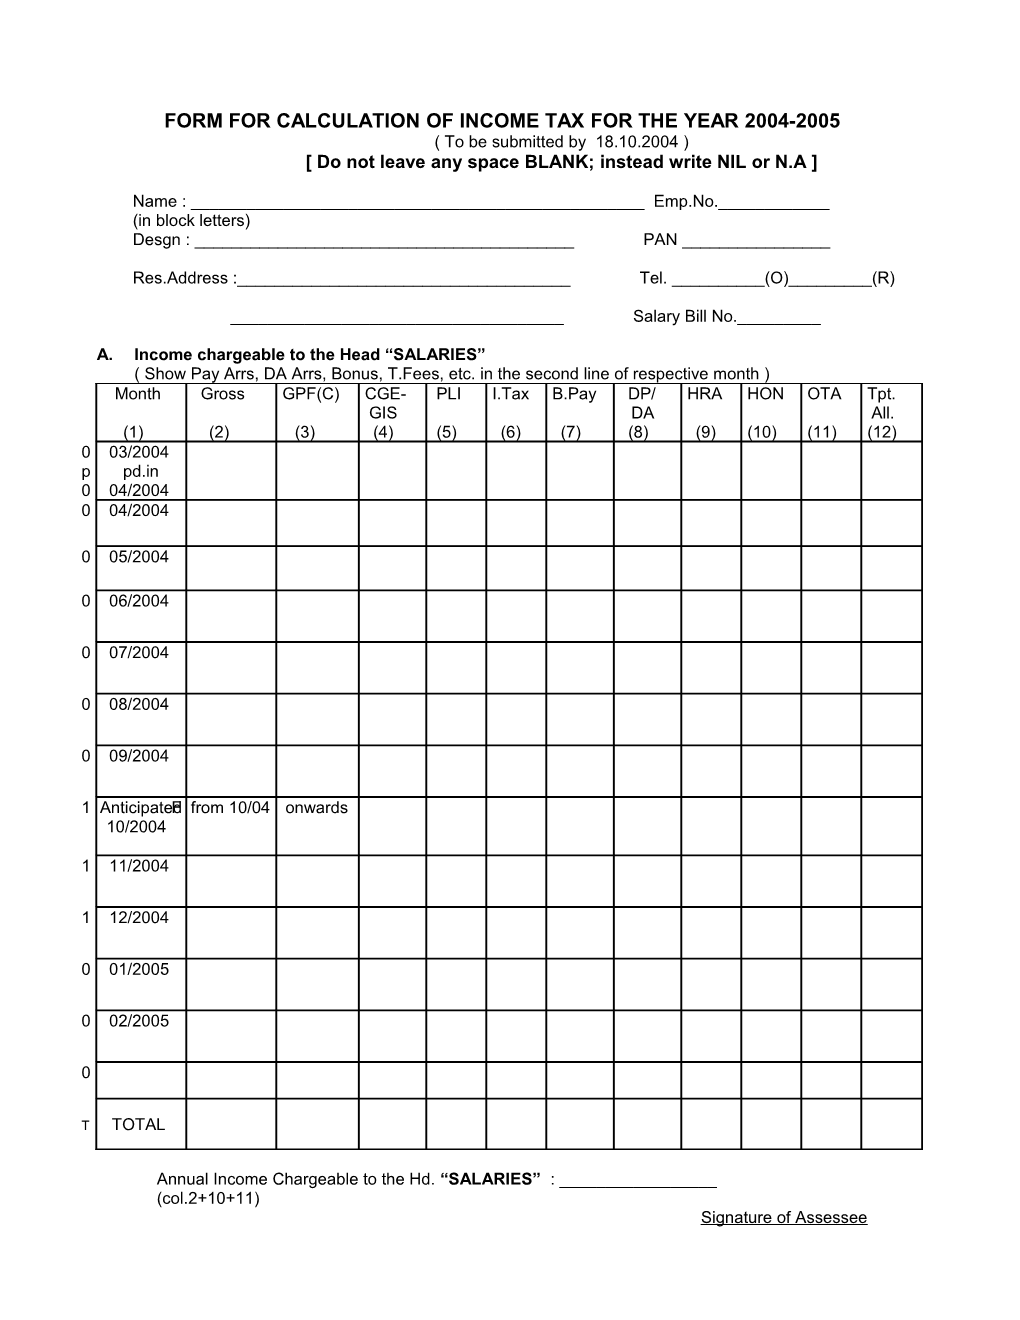 Form for Calculation of Income Tax for the Year 2004-2005